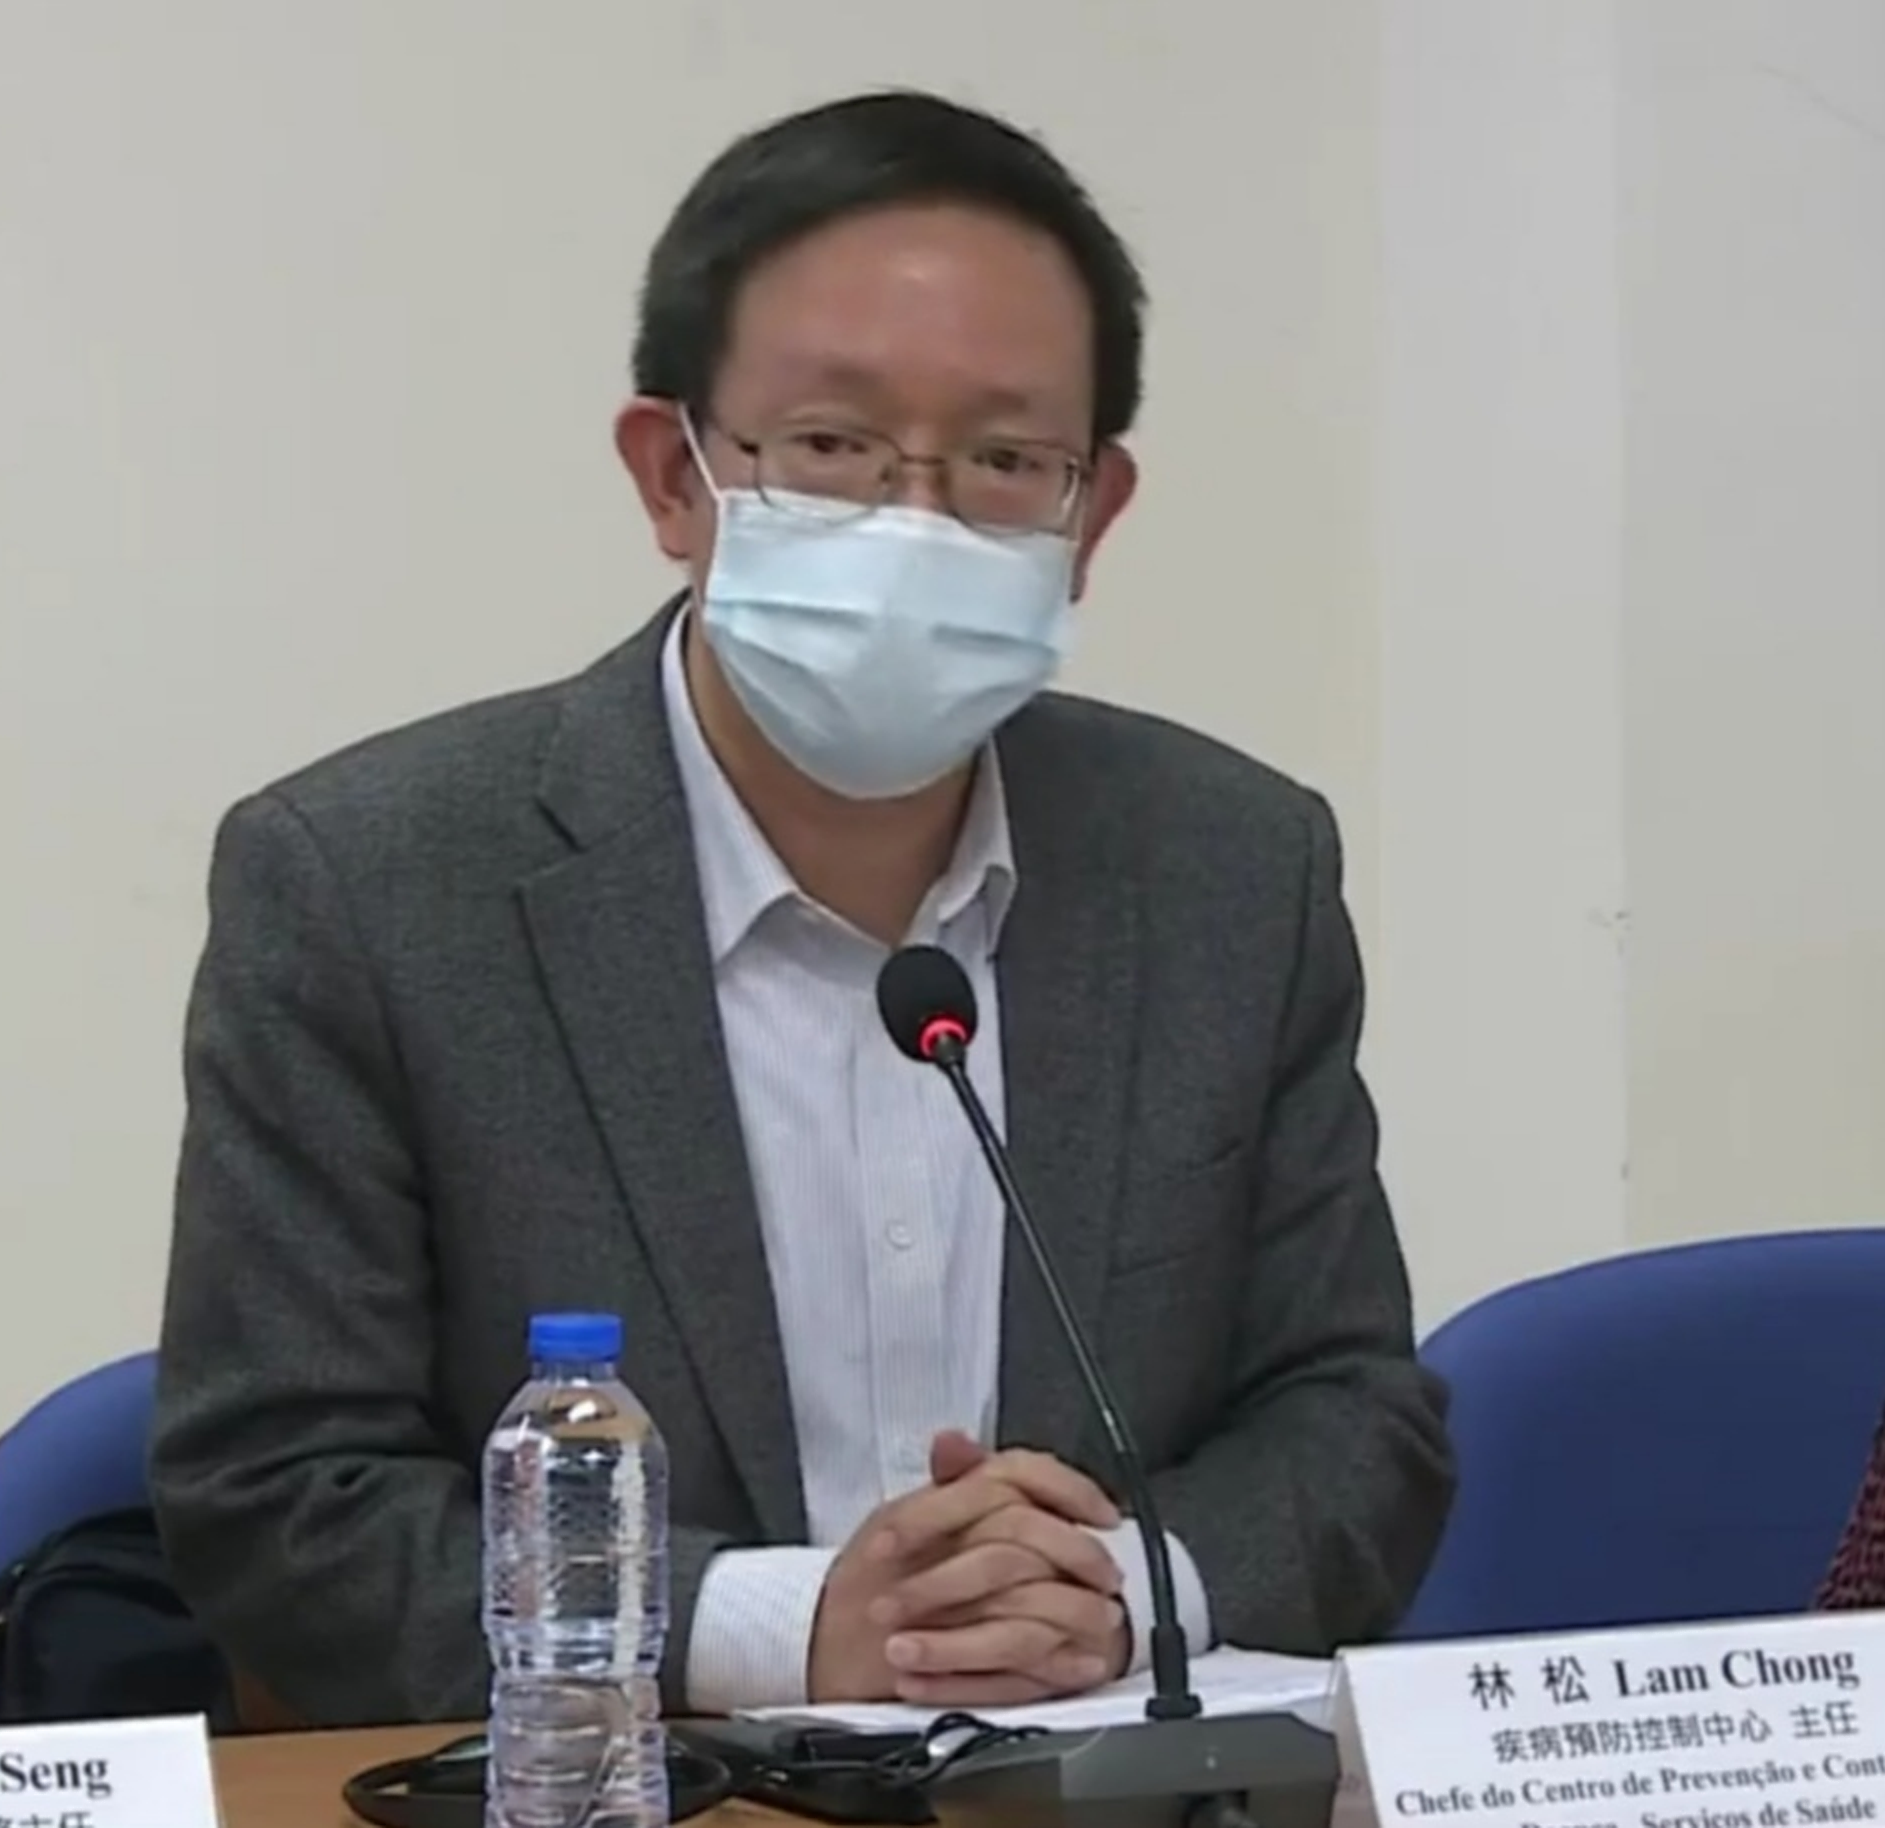 2 more patients diagnosed with COVID-19 visited Macau: SSM